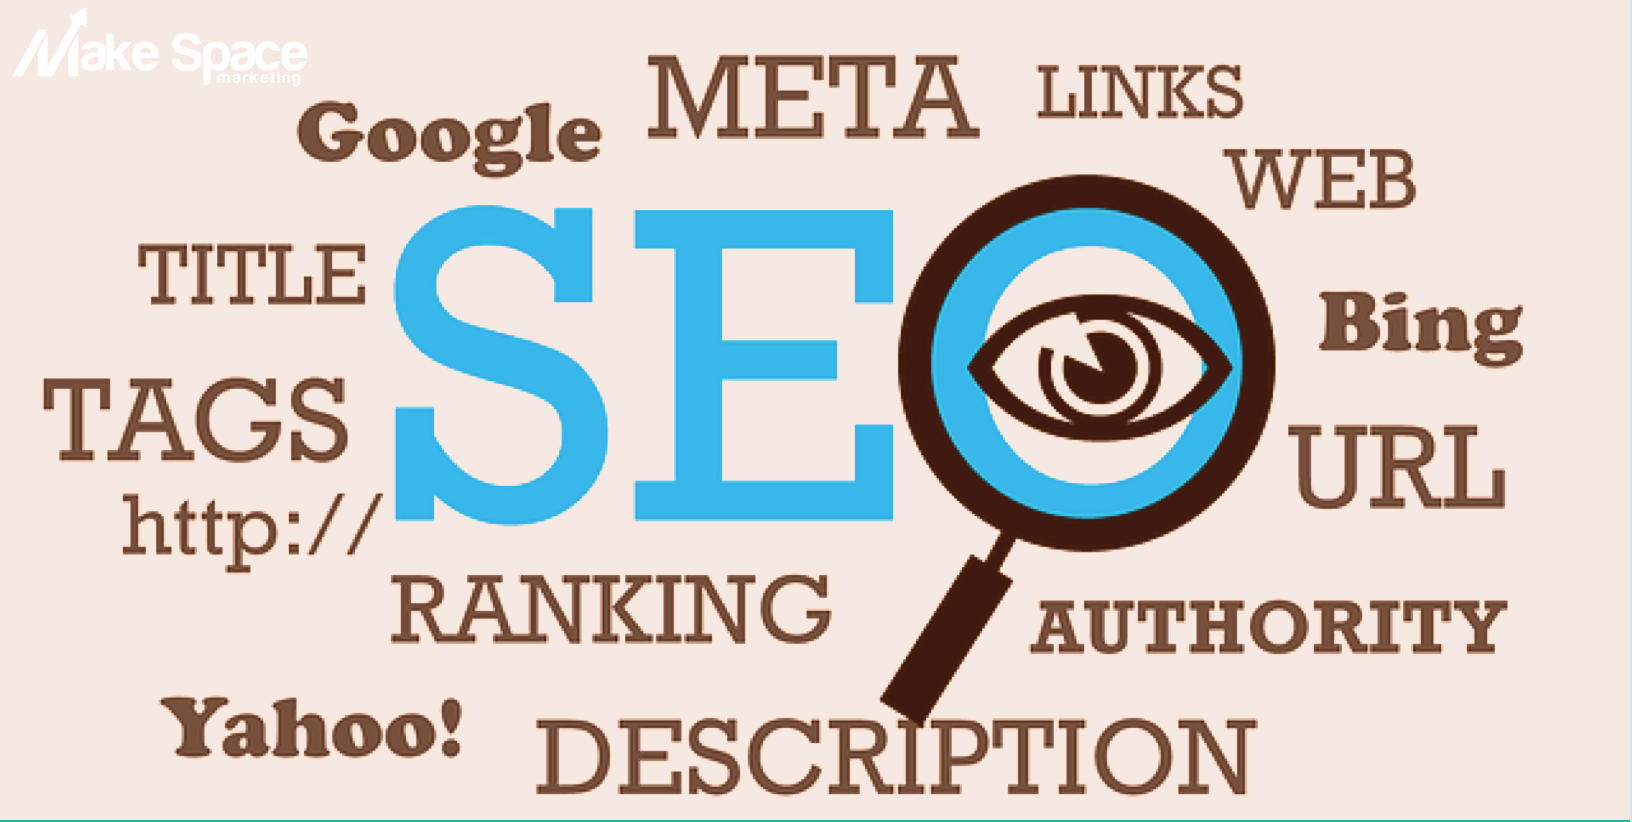 The importance of keywords for SEO